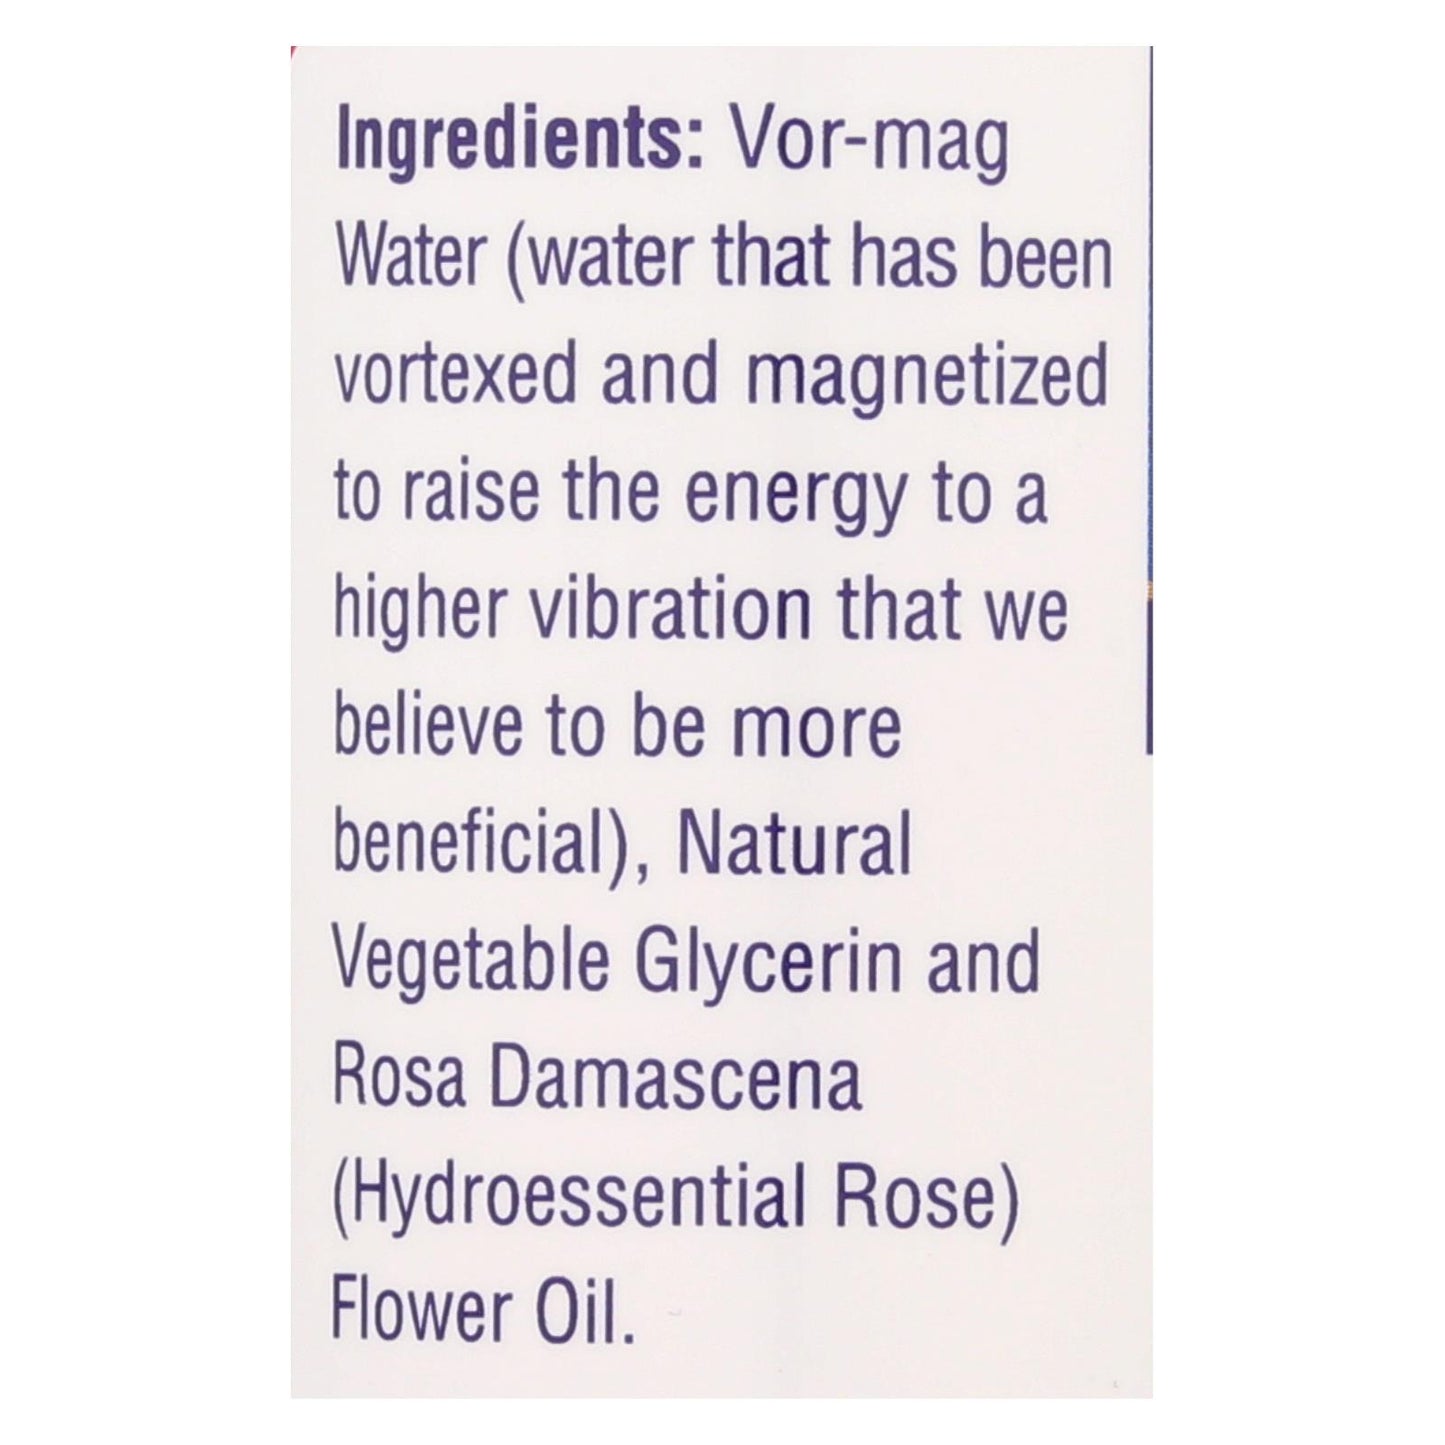 
                  
                    Heritage Products Rosewater And Glycerin, 4 Fl Oz
                  
                